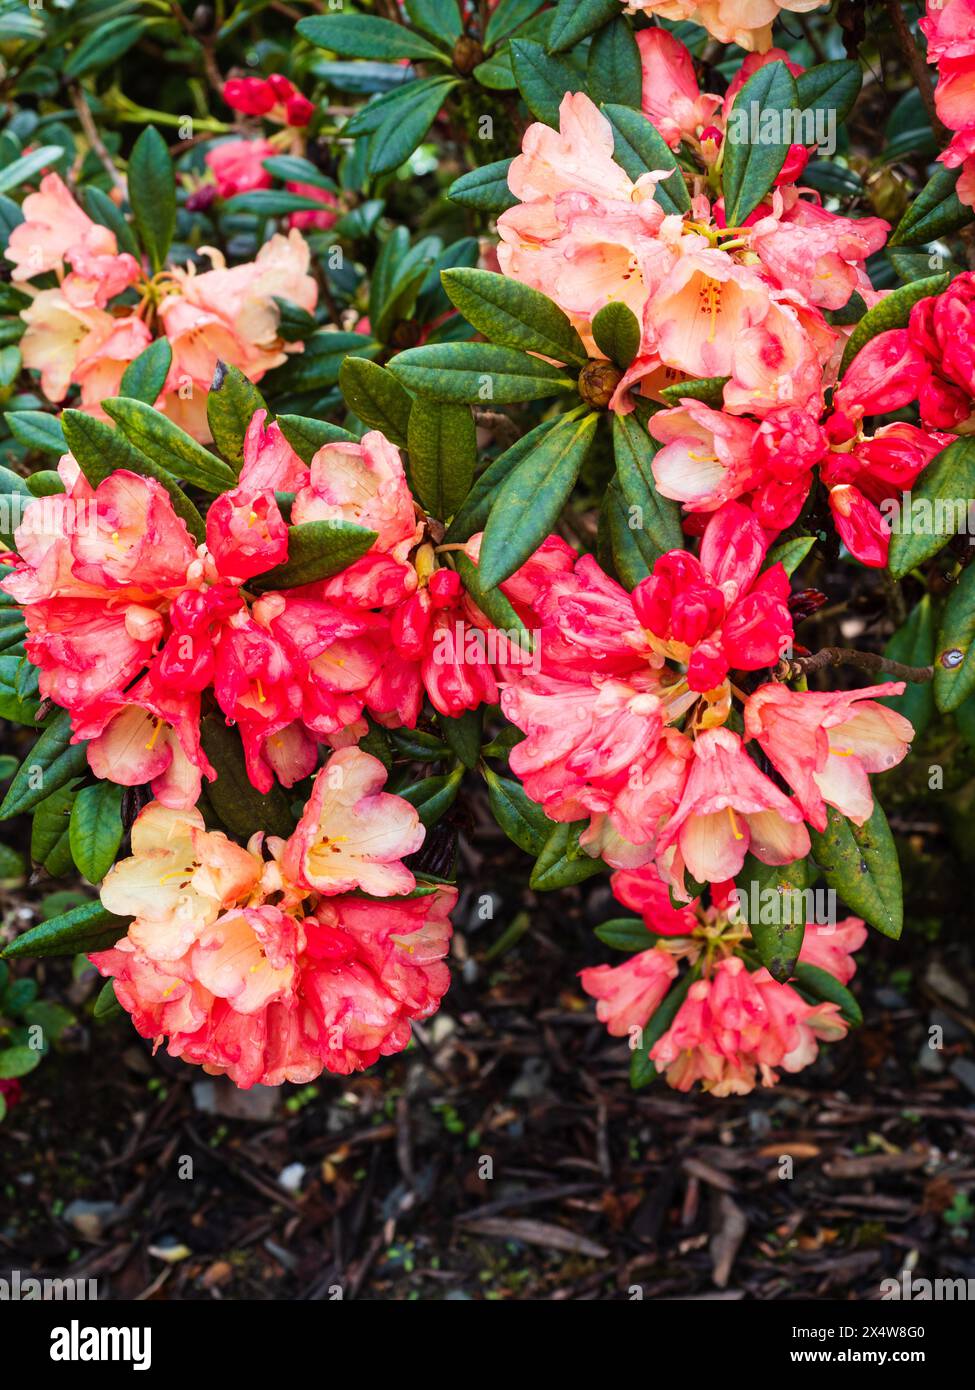 Peach and pink spring flowers of the hardy garden hybrid evergreen shrub, Rhododendron 'Seaview Sunset' Stock Photo